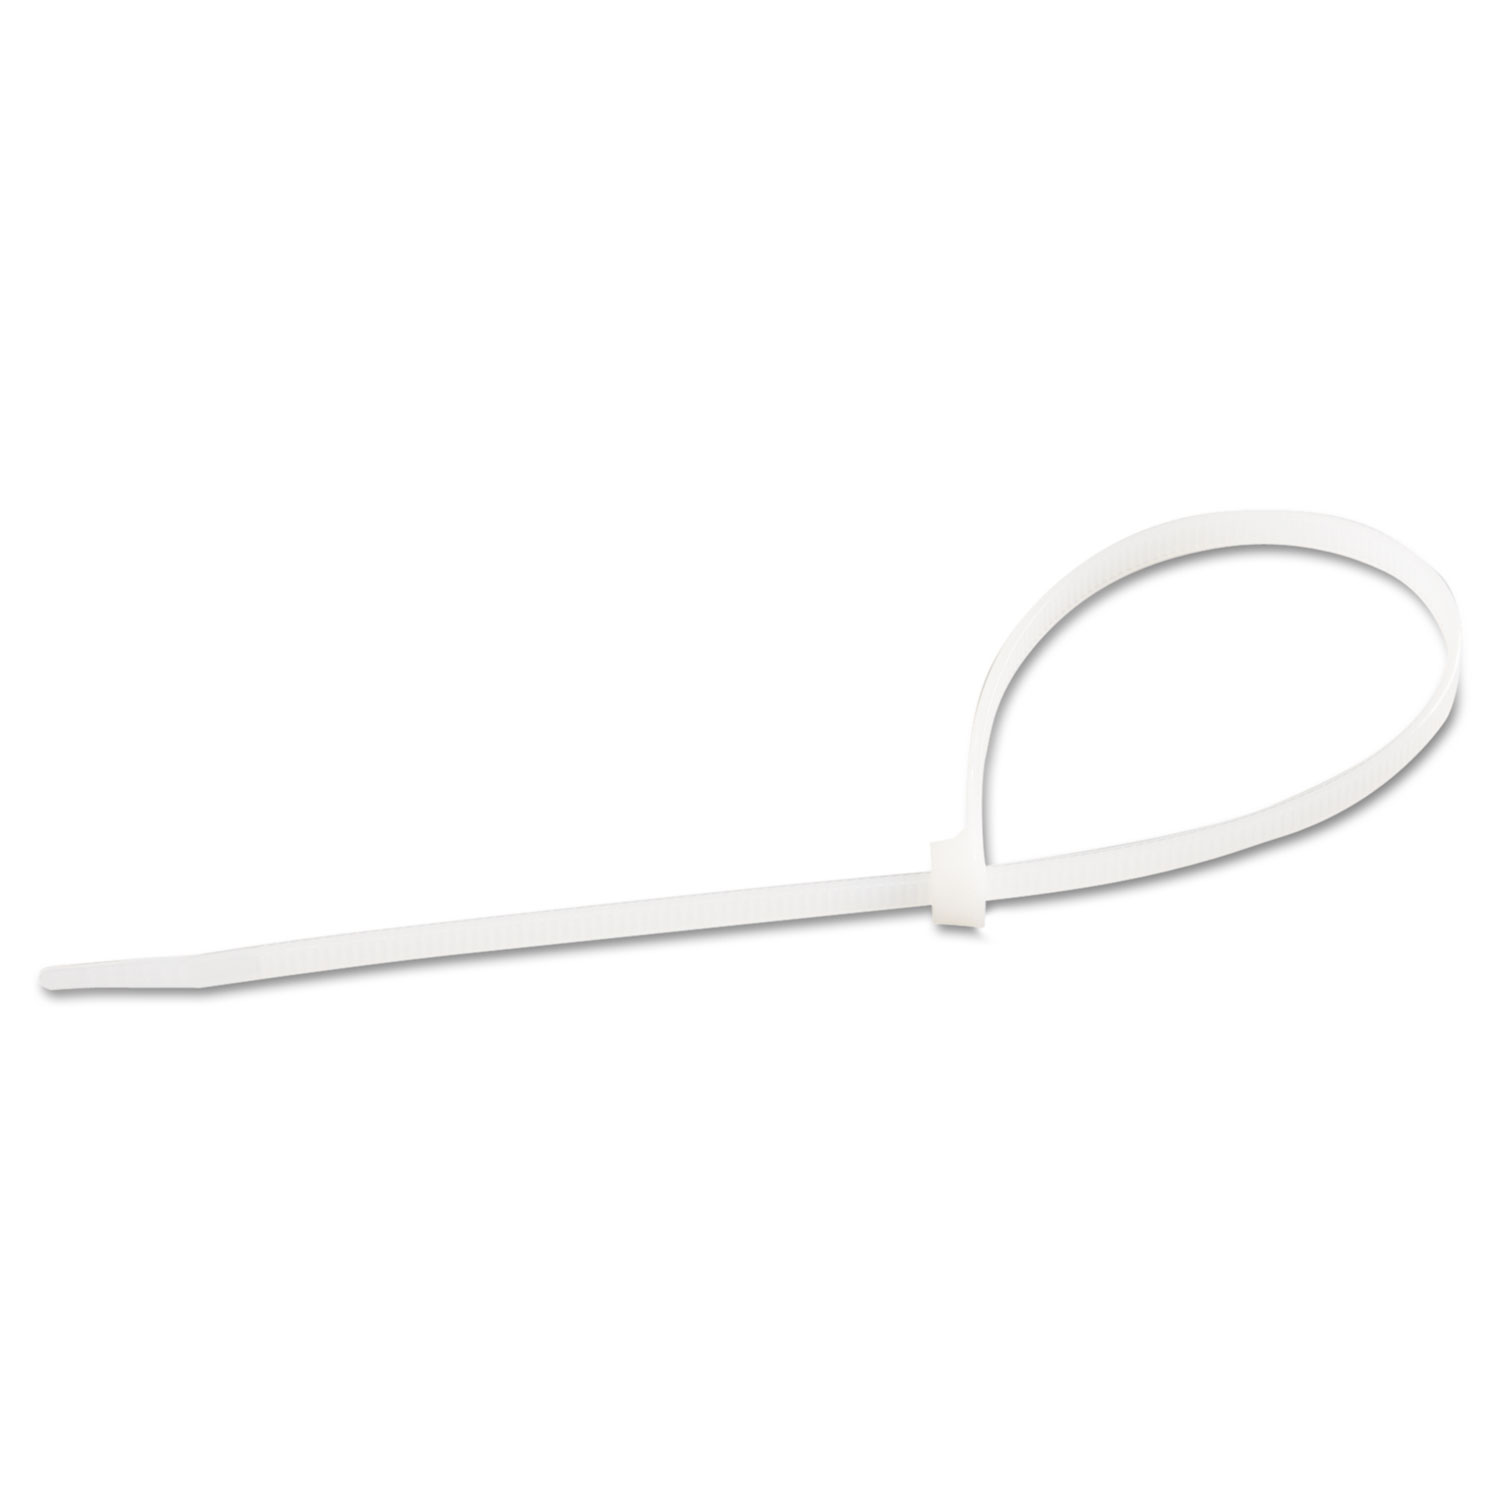 Cable Ties, 11, 75 lb, White, 100/Pack